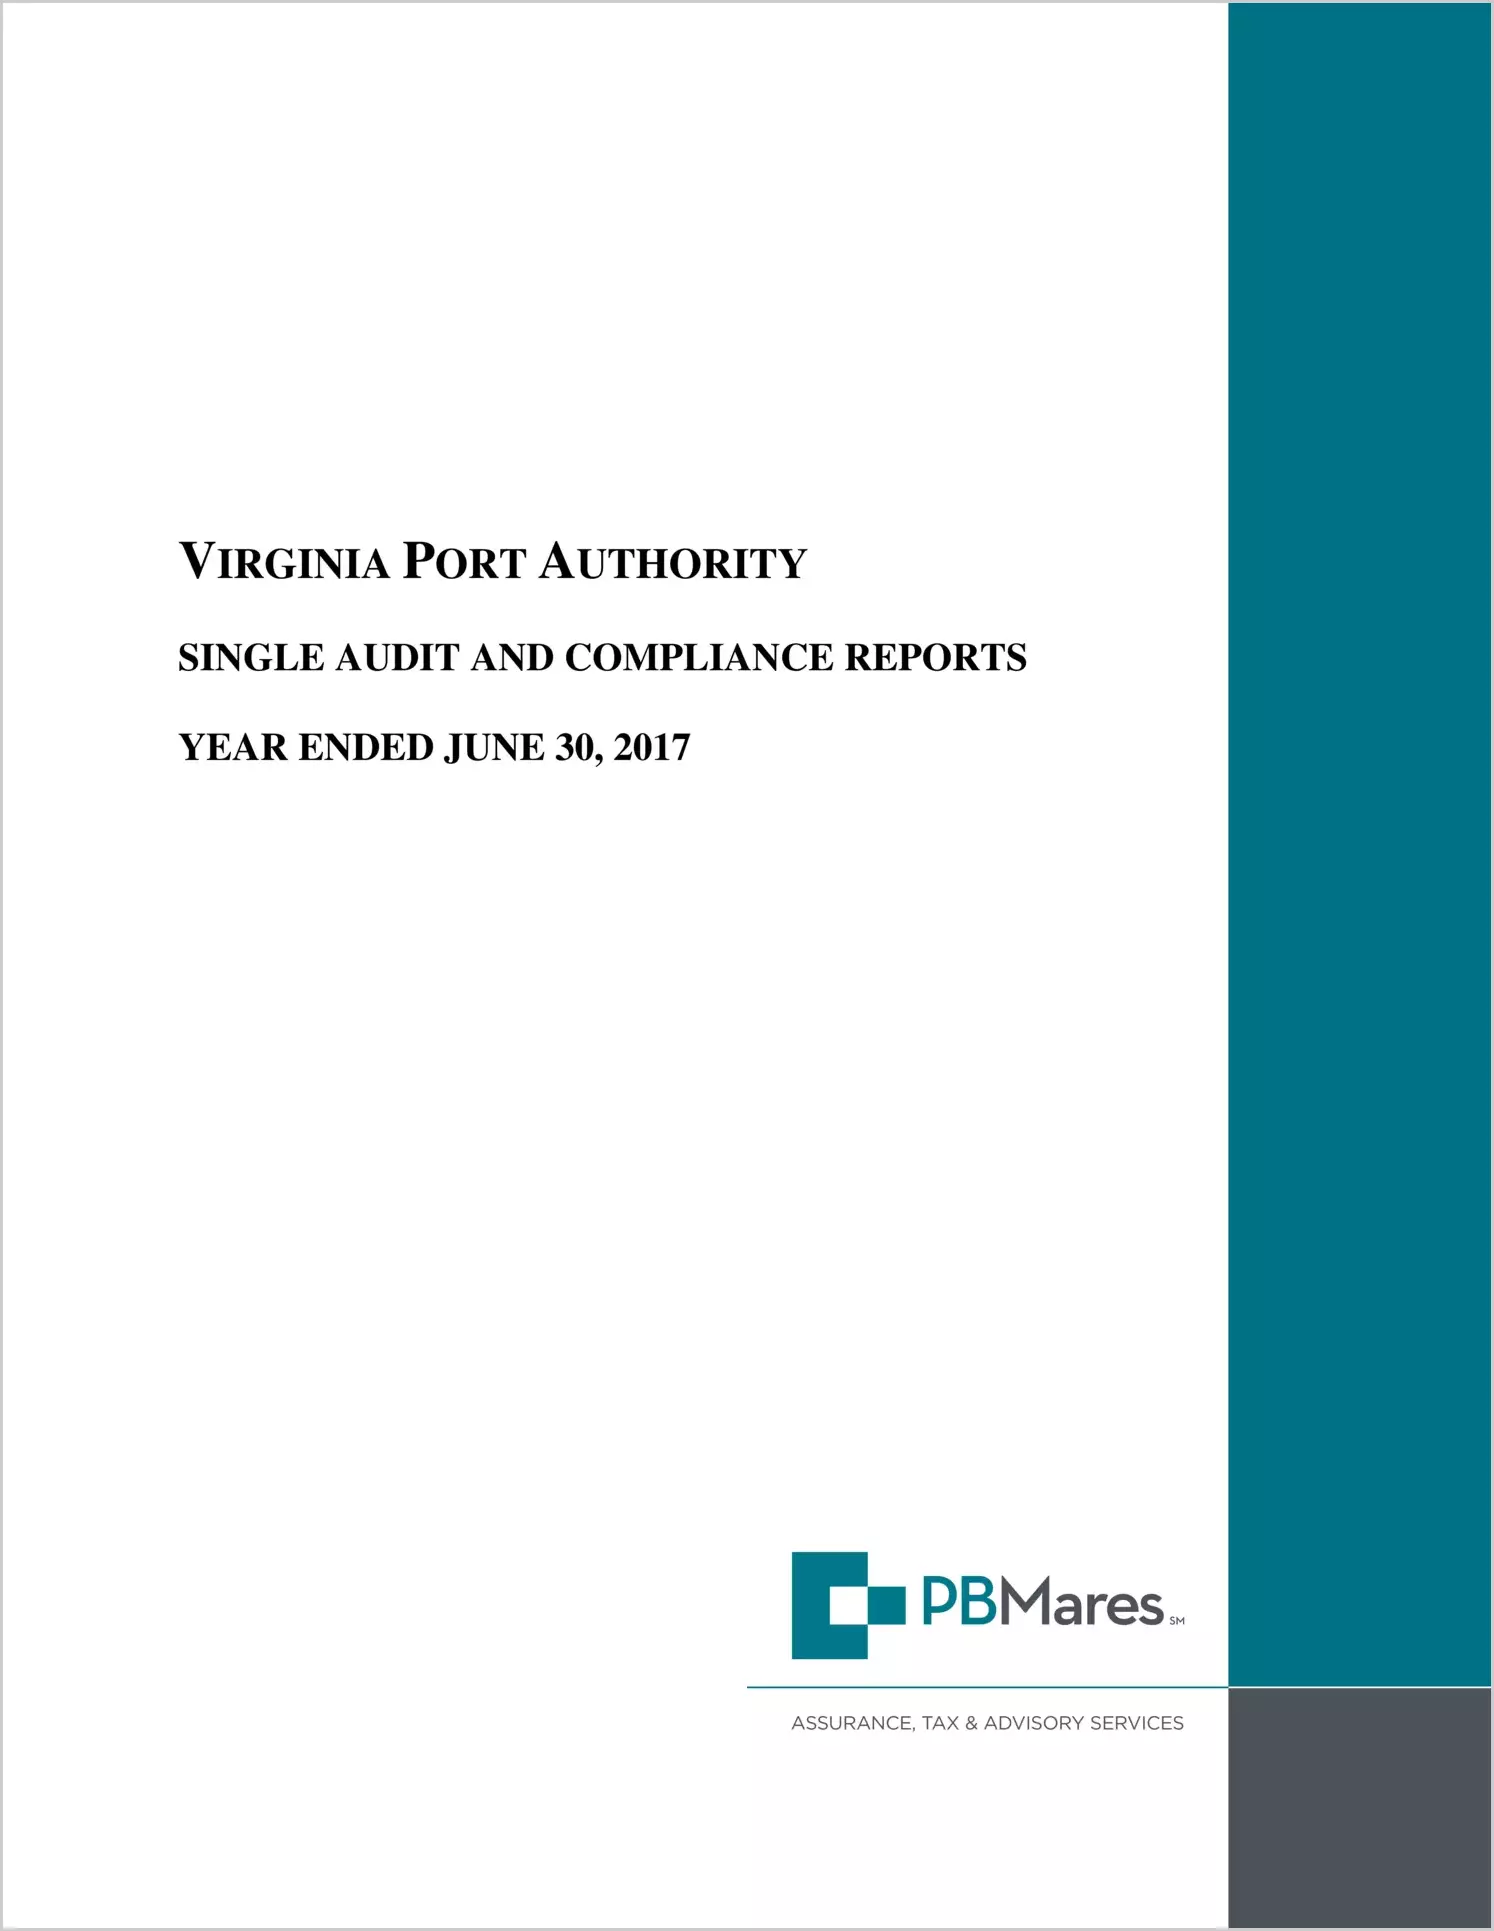 Virginia Port Authority for the year ended June 30, 2017